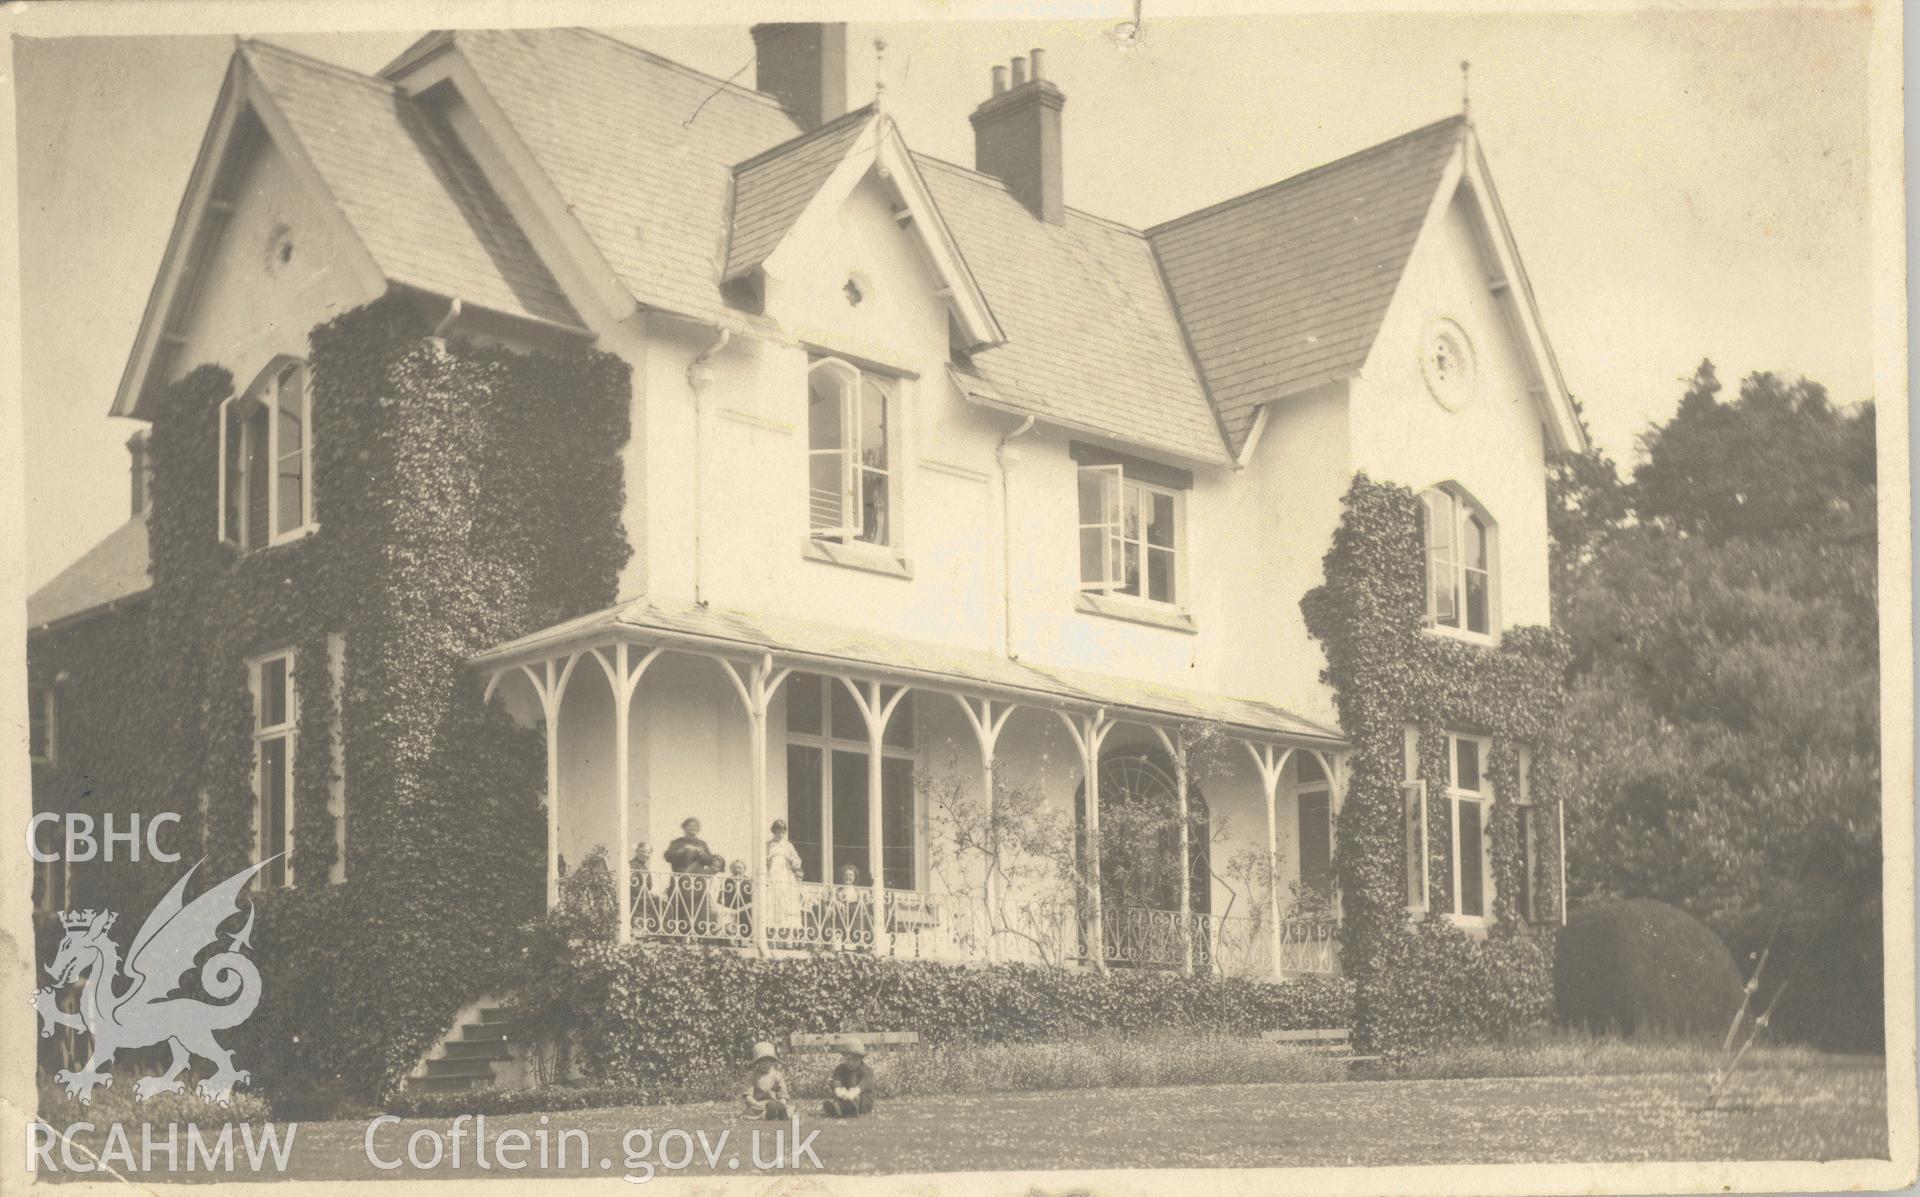 Digitised postcard image of unnamed house in Usk with figures. Produced by Parks and Gardens Data Services, from an original item in the Peter Davis Collection at Parks and Gardens UK. We hold only web-resolution images of this collection, suitable for viewing on screen and for research purposes only. We do not hold the original images, or publication quality scans.